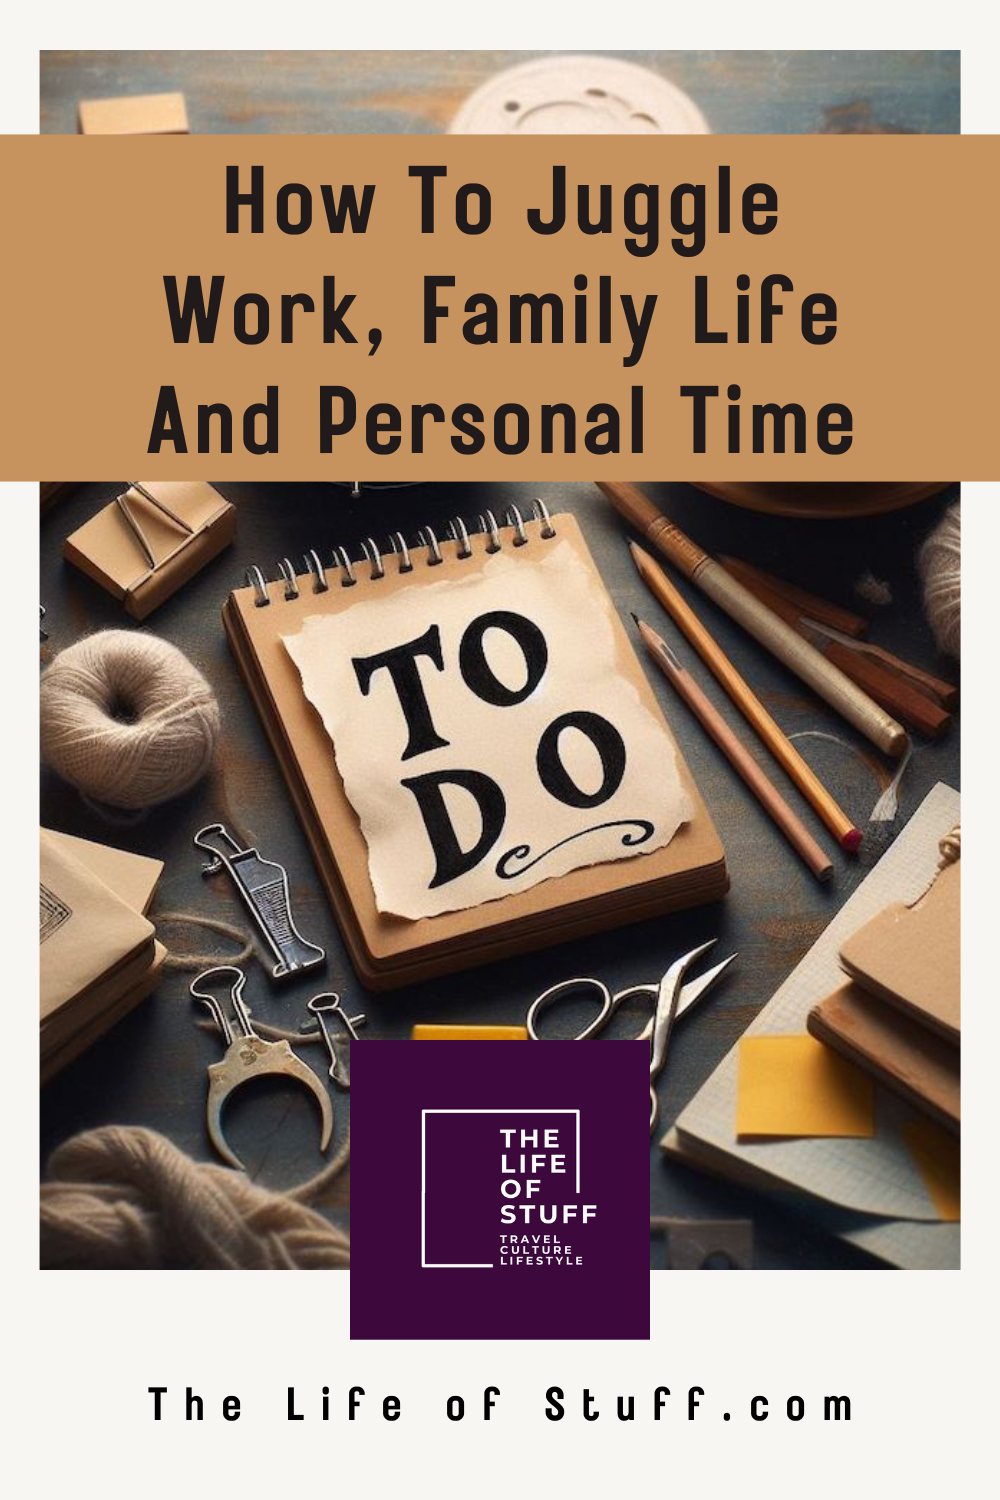 How To Juggle Work, Family And Personal Time - The Life of Stuff